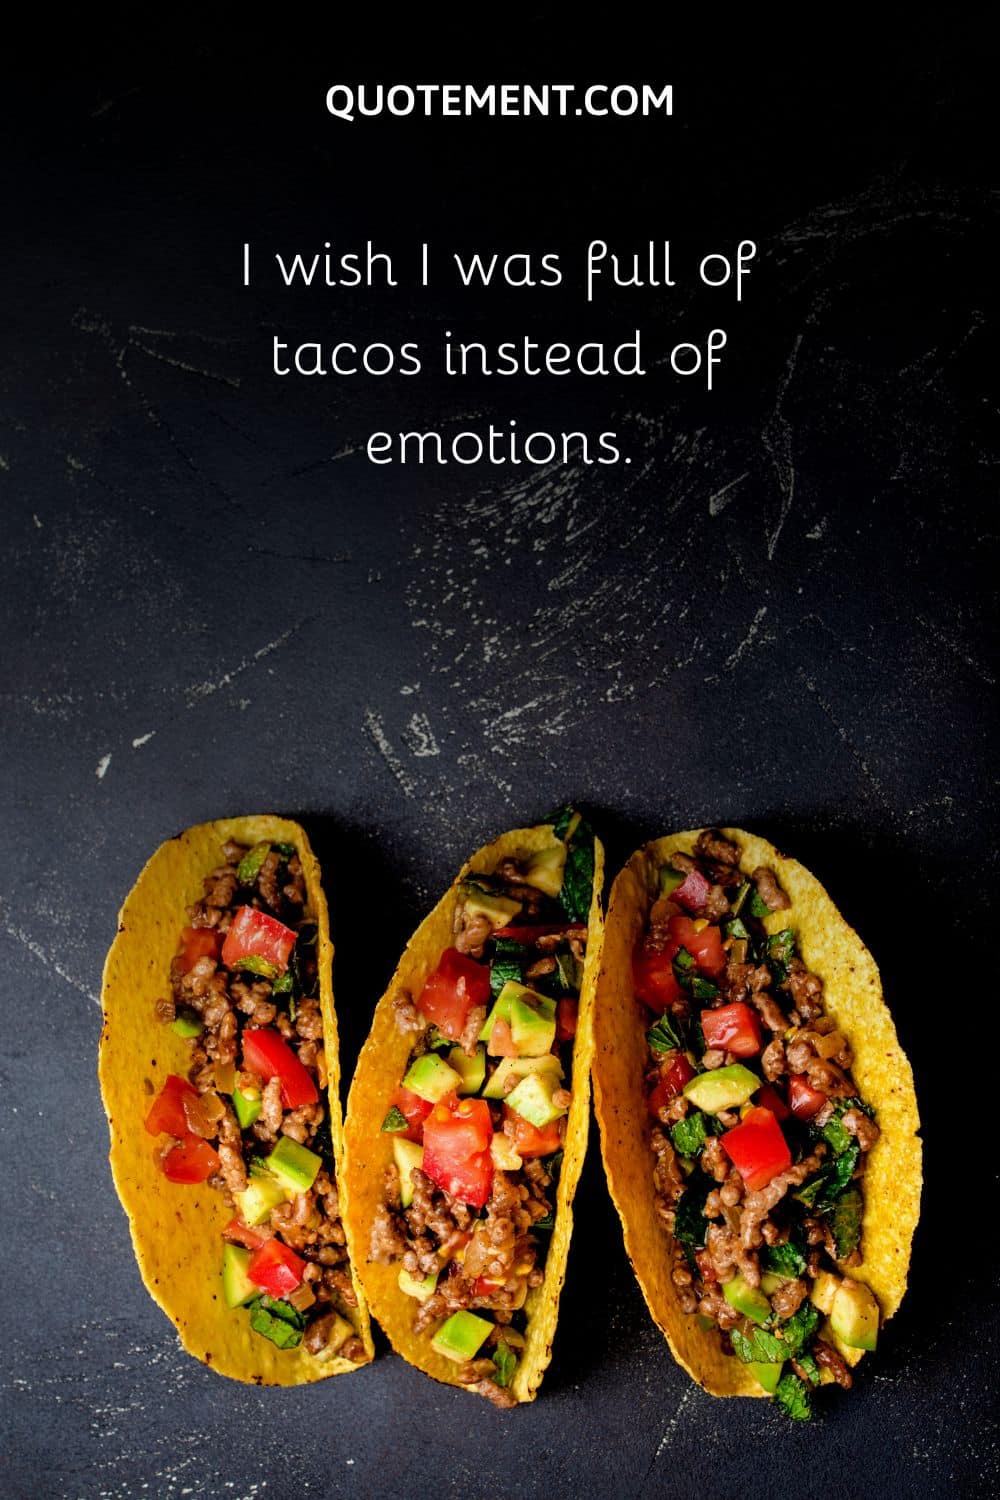 I wish I was full of tacos instead of emotions